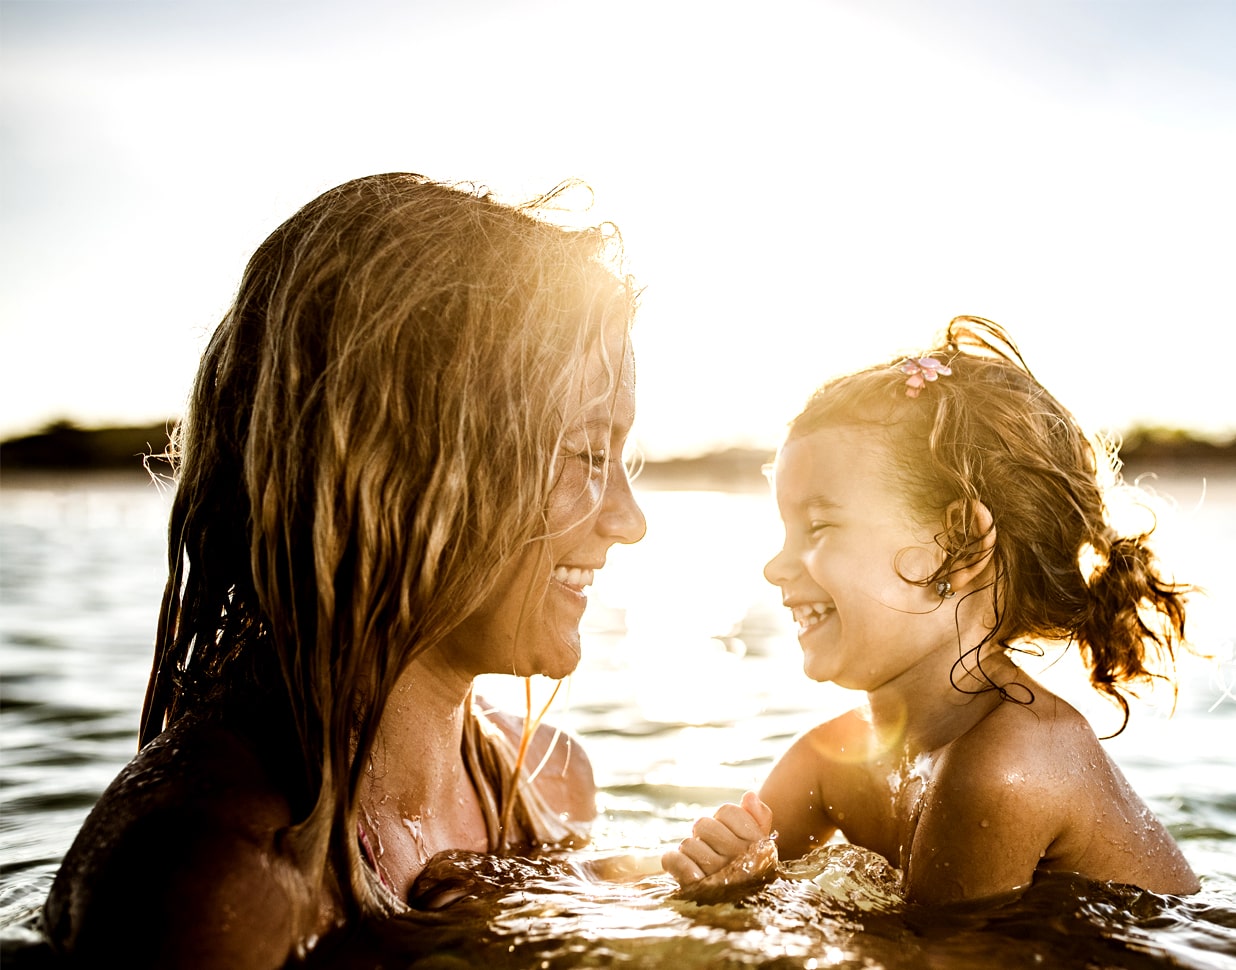 Dive Into Summer Safely: Tips for Healthy Beach and Pool Adventures